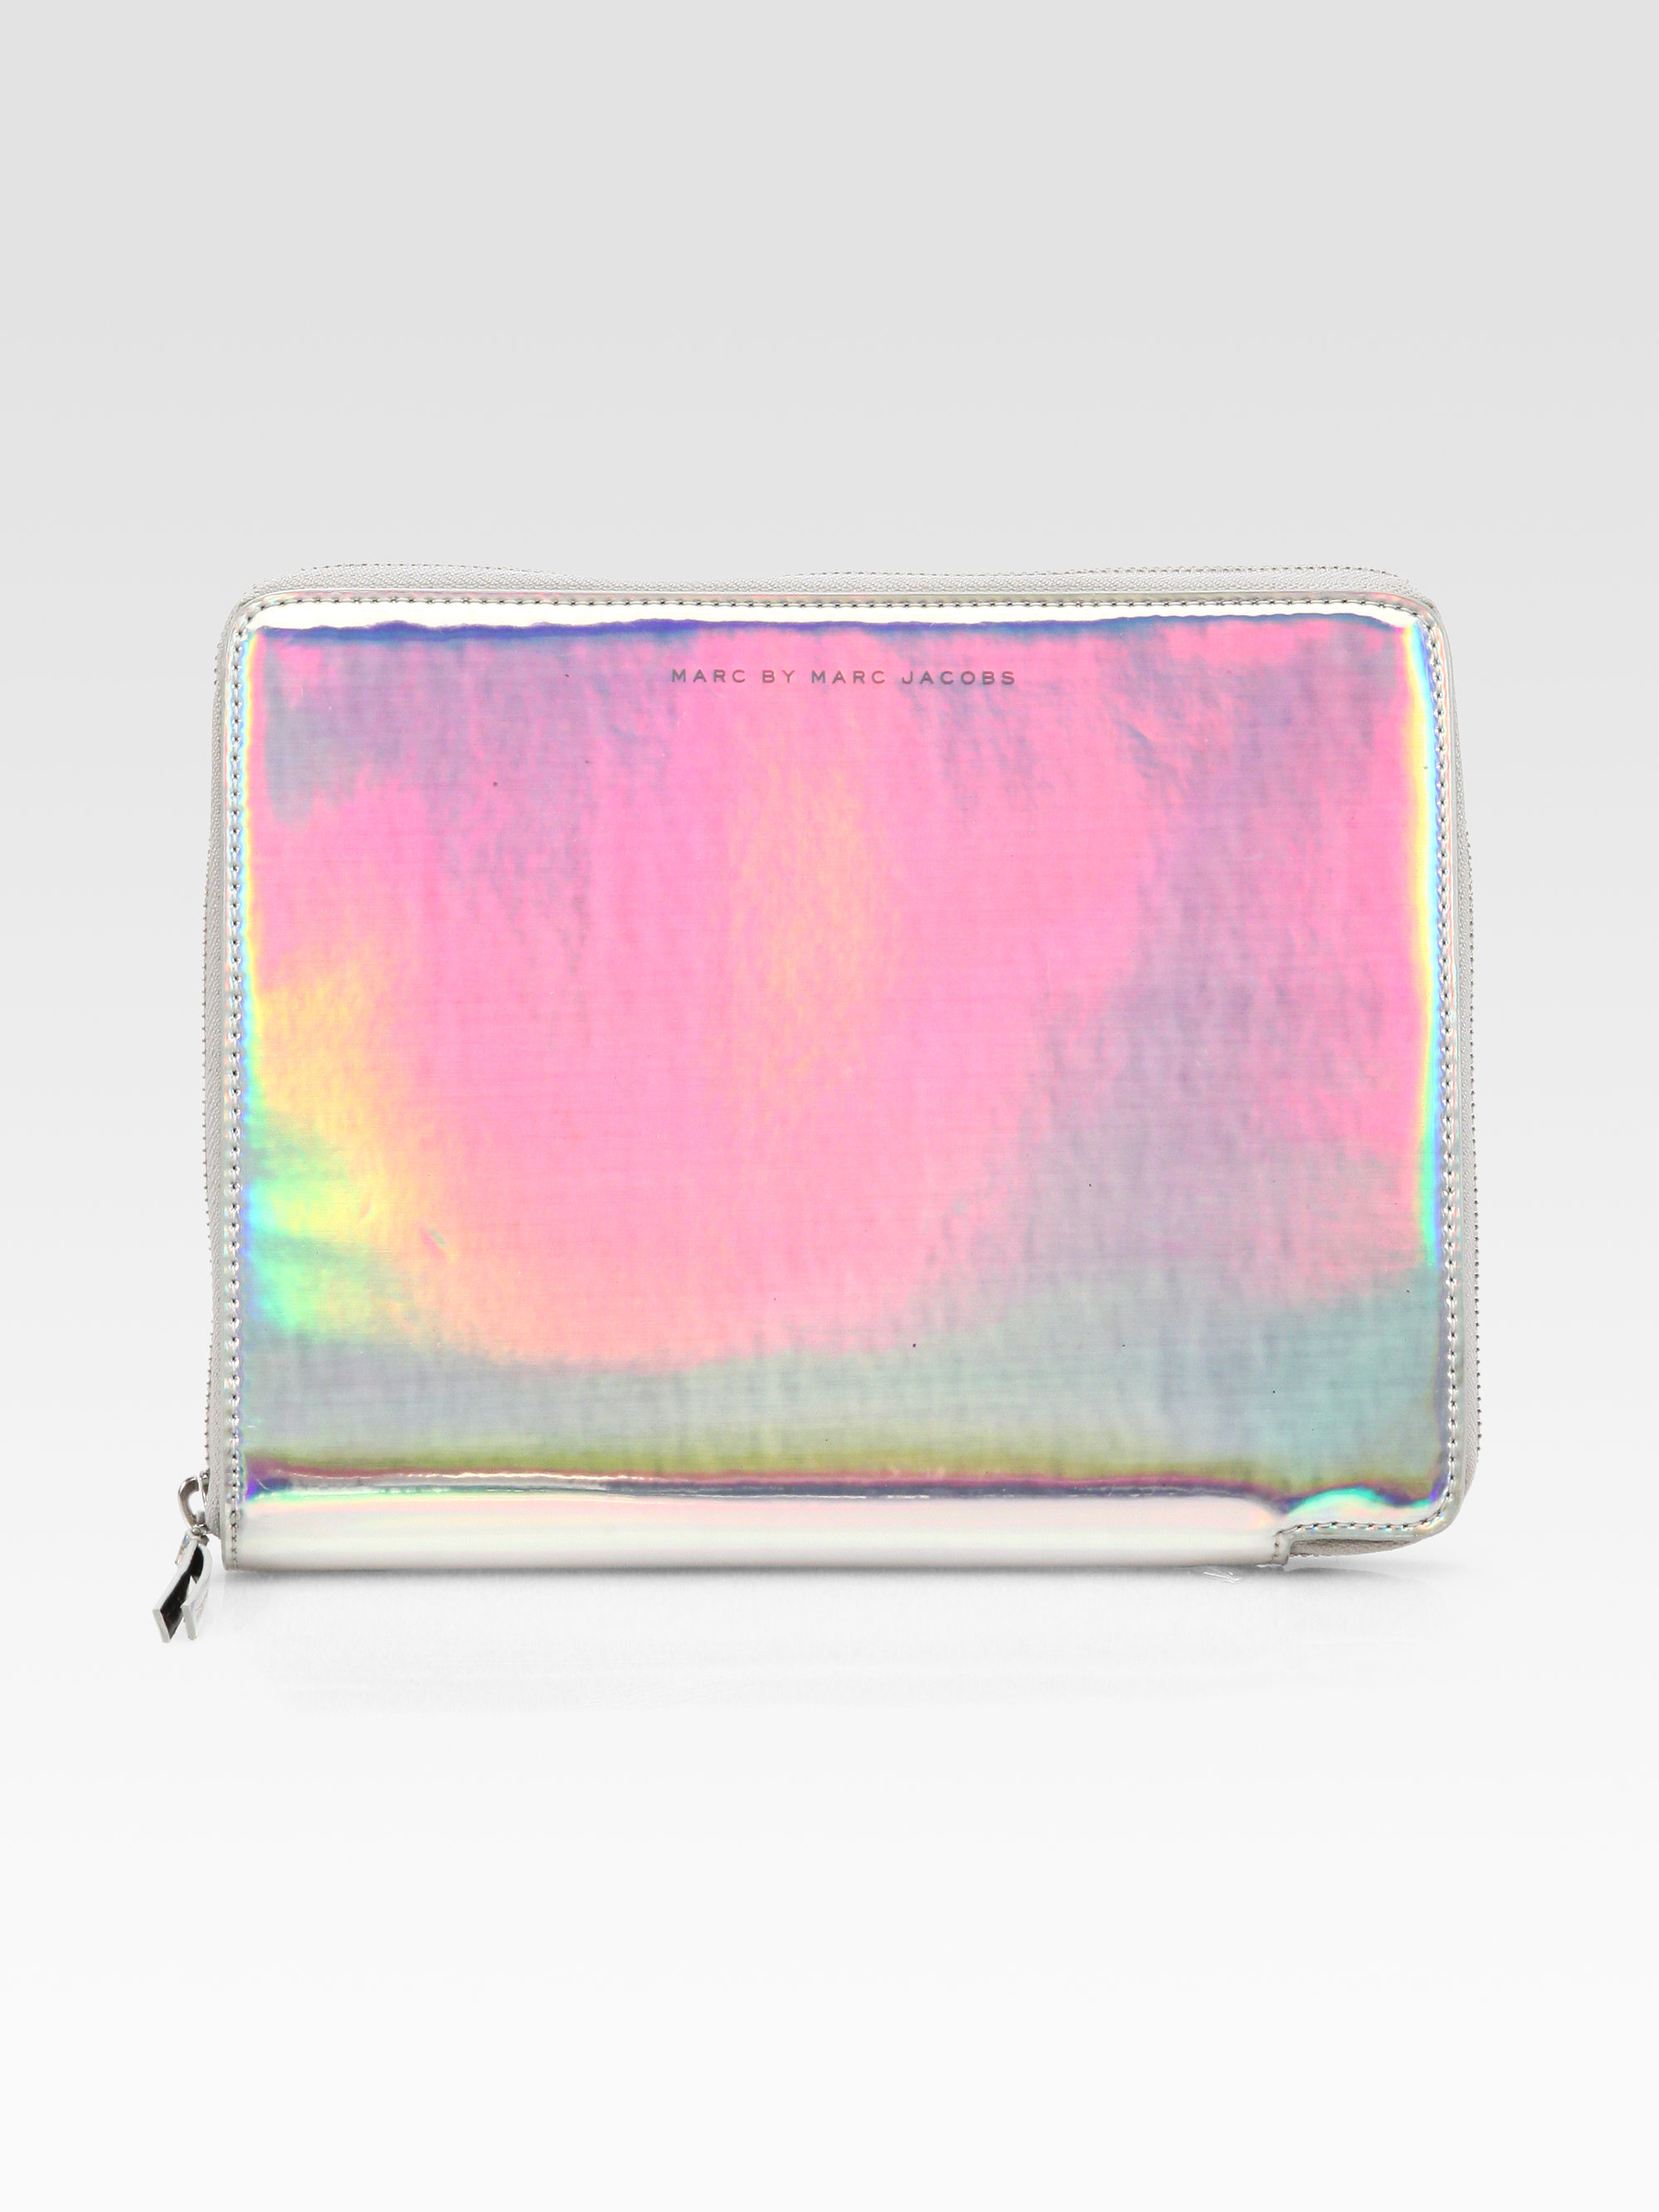 Lyst - Marc By Marc Jacobs Techno Holographic Leather Tablet Case in Metallic